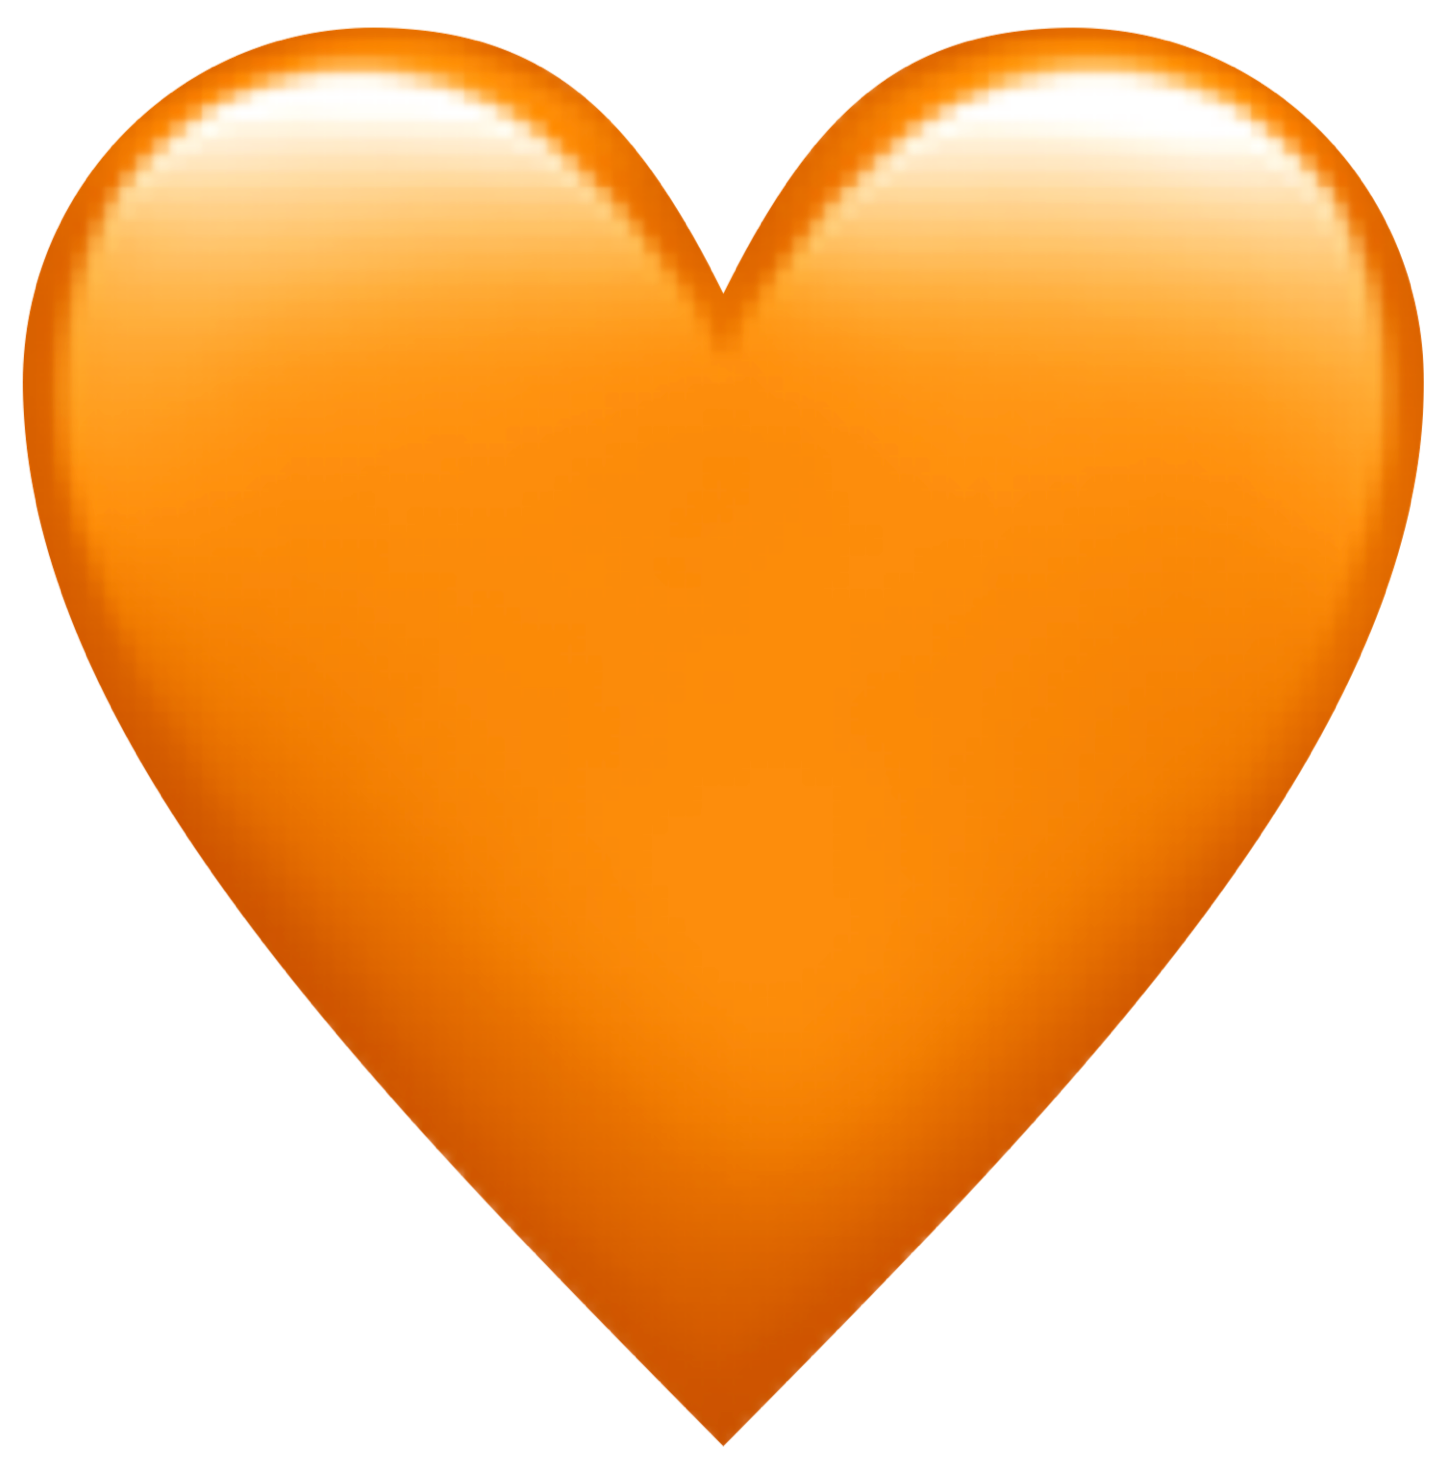 Heart Emoji PNG Picture